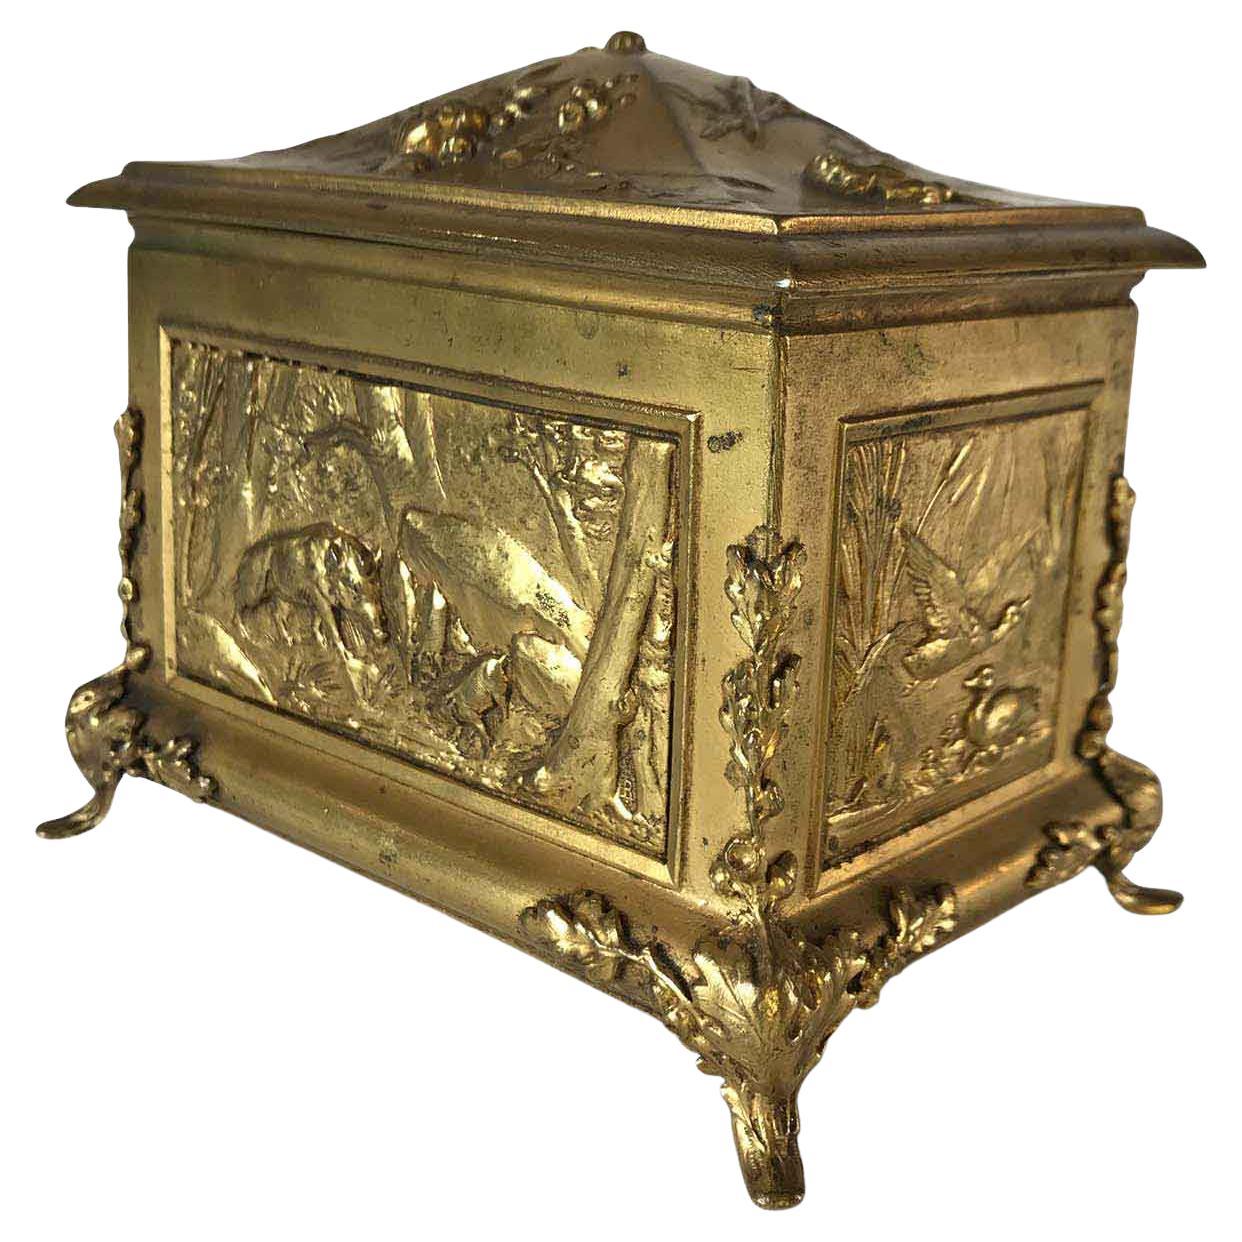 Jewelry box with animals in gilt metal, rectangular shape resting on four feet featuring embossed acorns and oak leaves, decorated on each side with different animals within squared frames. The front is finely repoussé with wild boars in the woods;